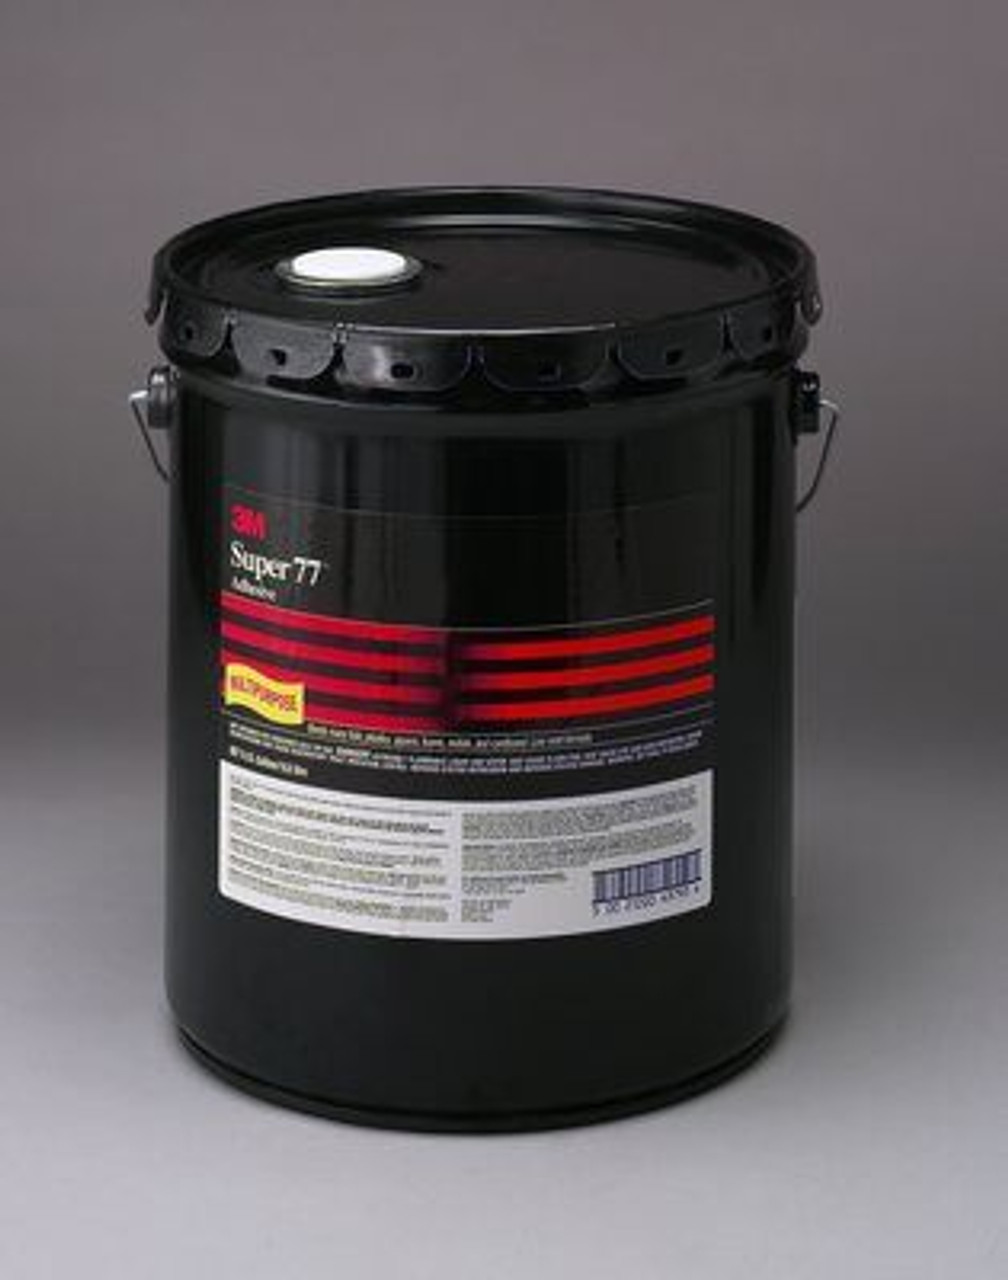 3M™ Super 77™ Classic Spray Adhesive, Clear, 5 Gallon Pail - The Binding  Source